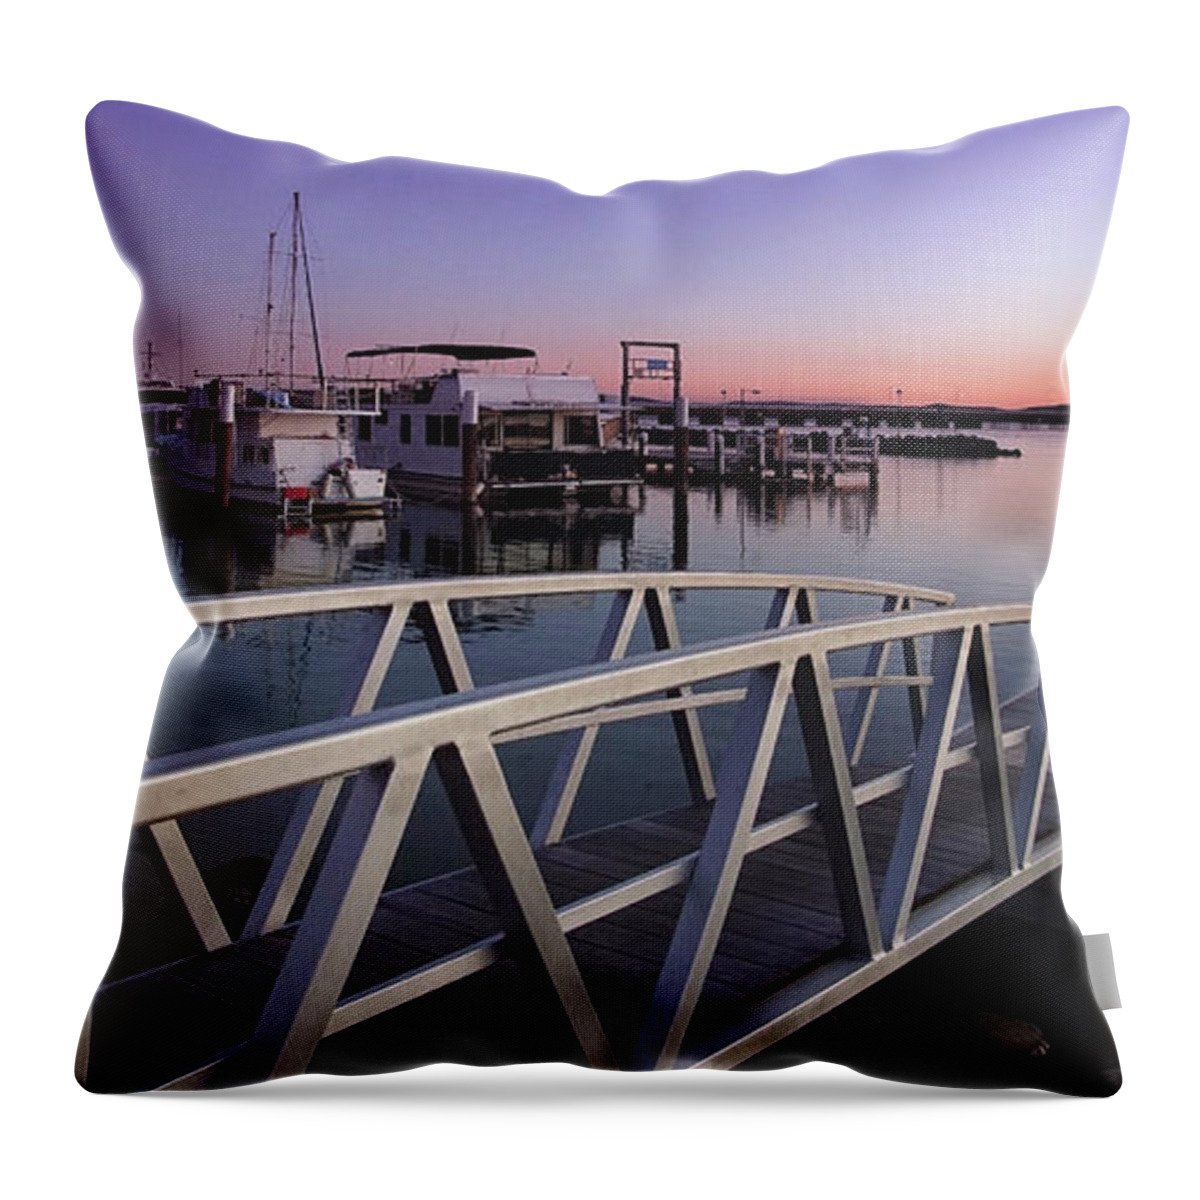 Forster Marina Sunset Nsw Australia Throw Pillow featuring the digital art Forster Marina Sunset 72922 by Kevin Chippindall